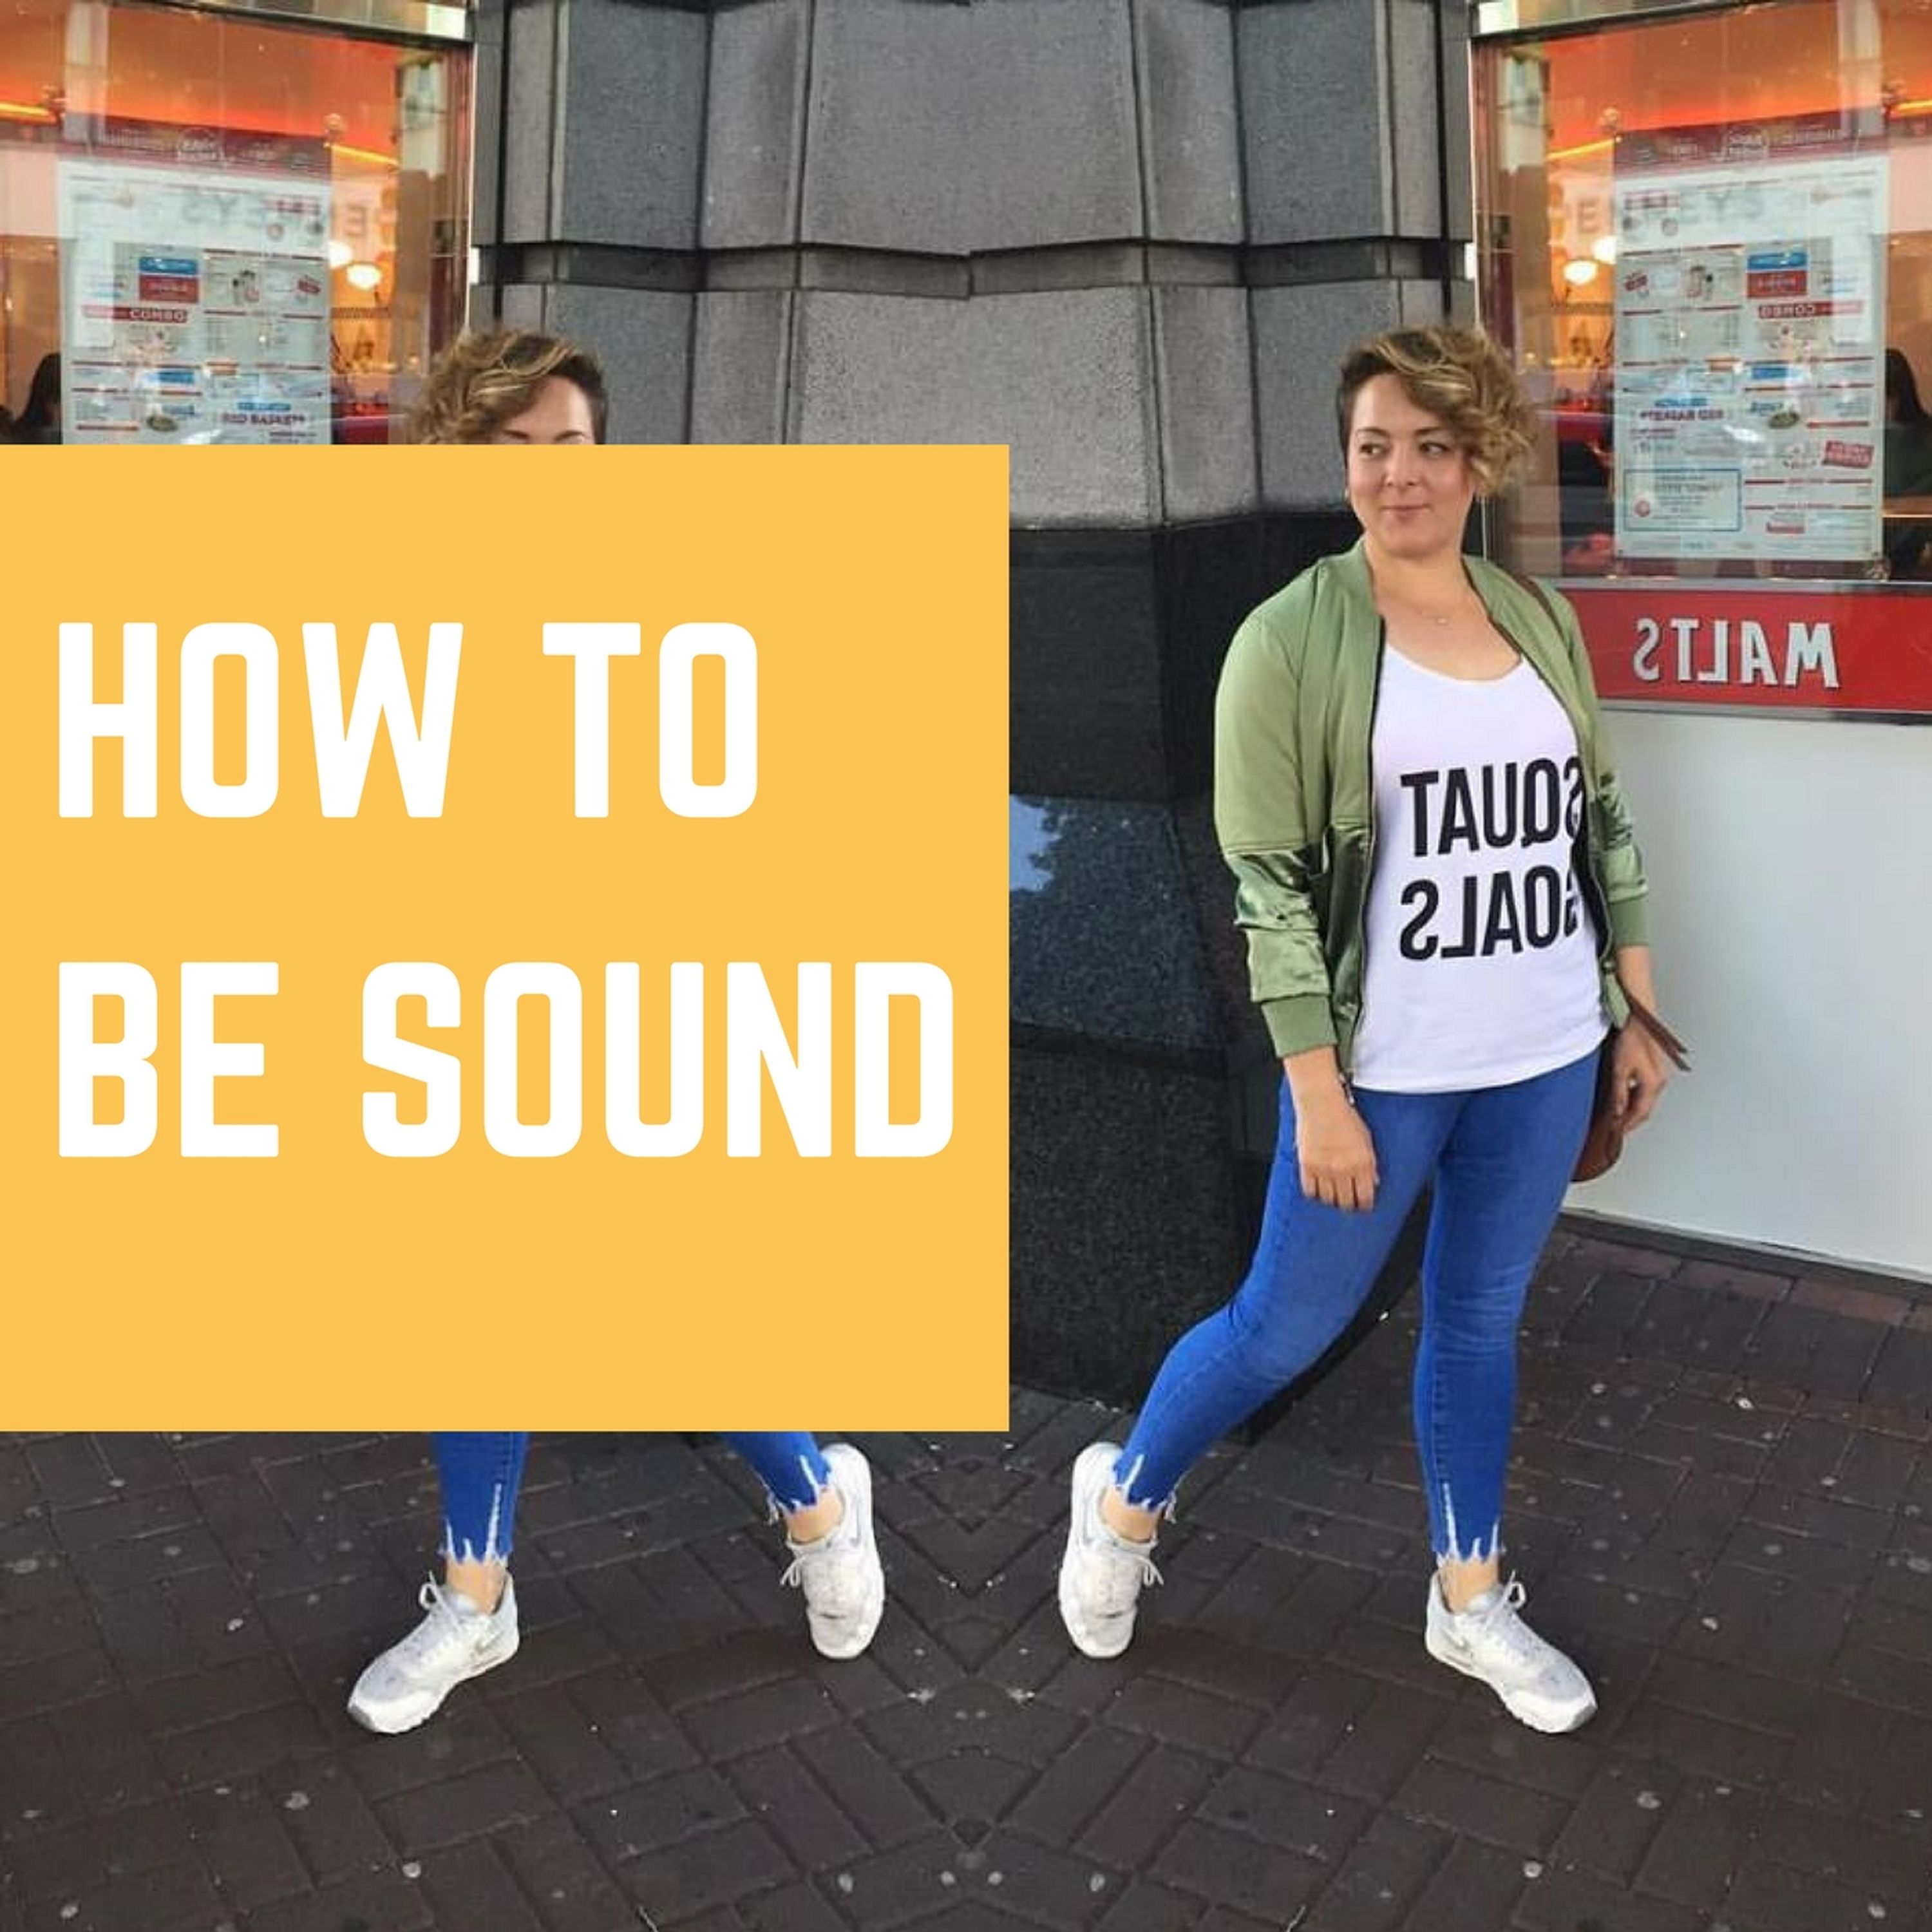 Niamh Maher on how to be sound